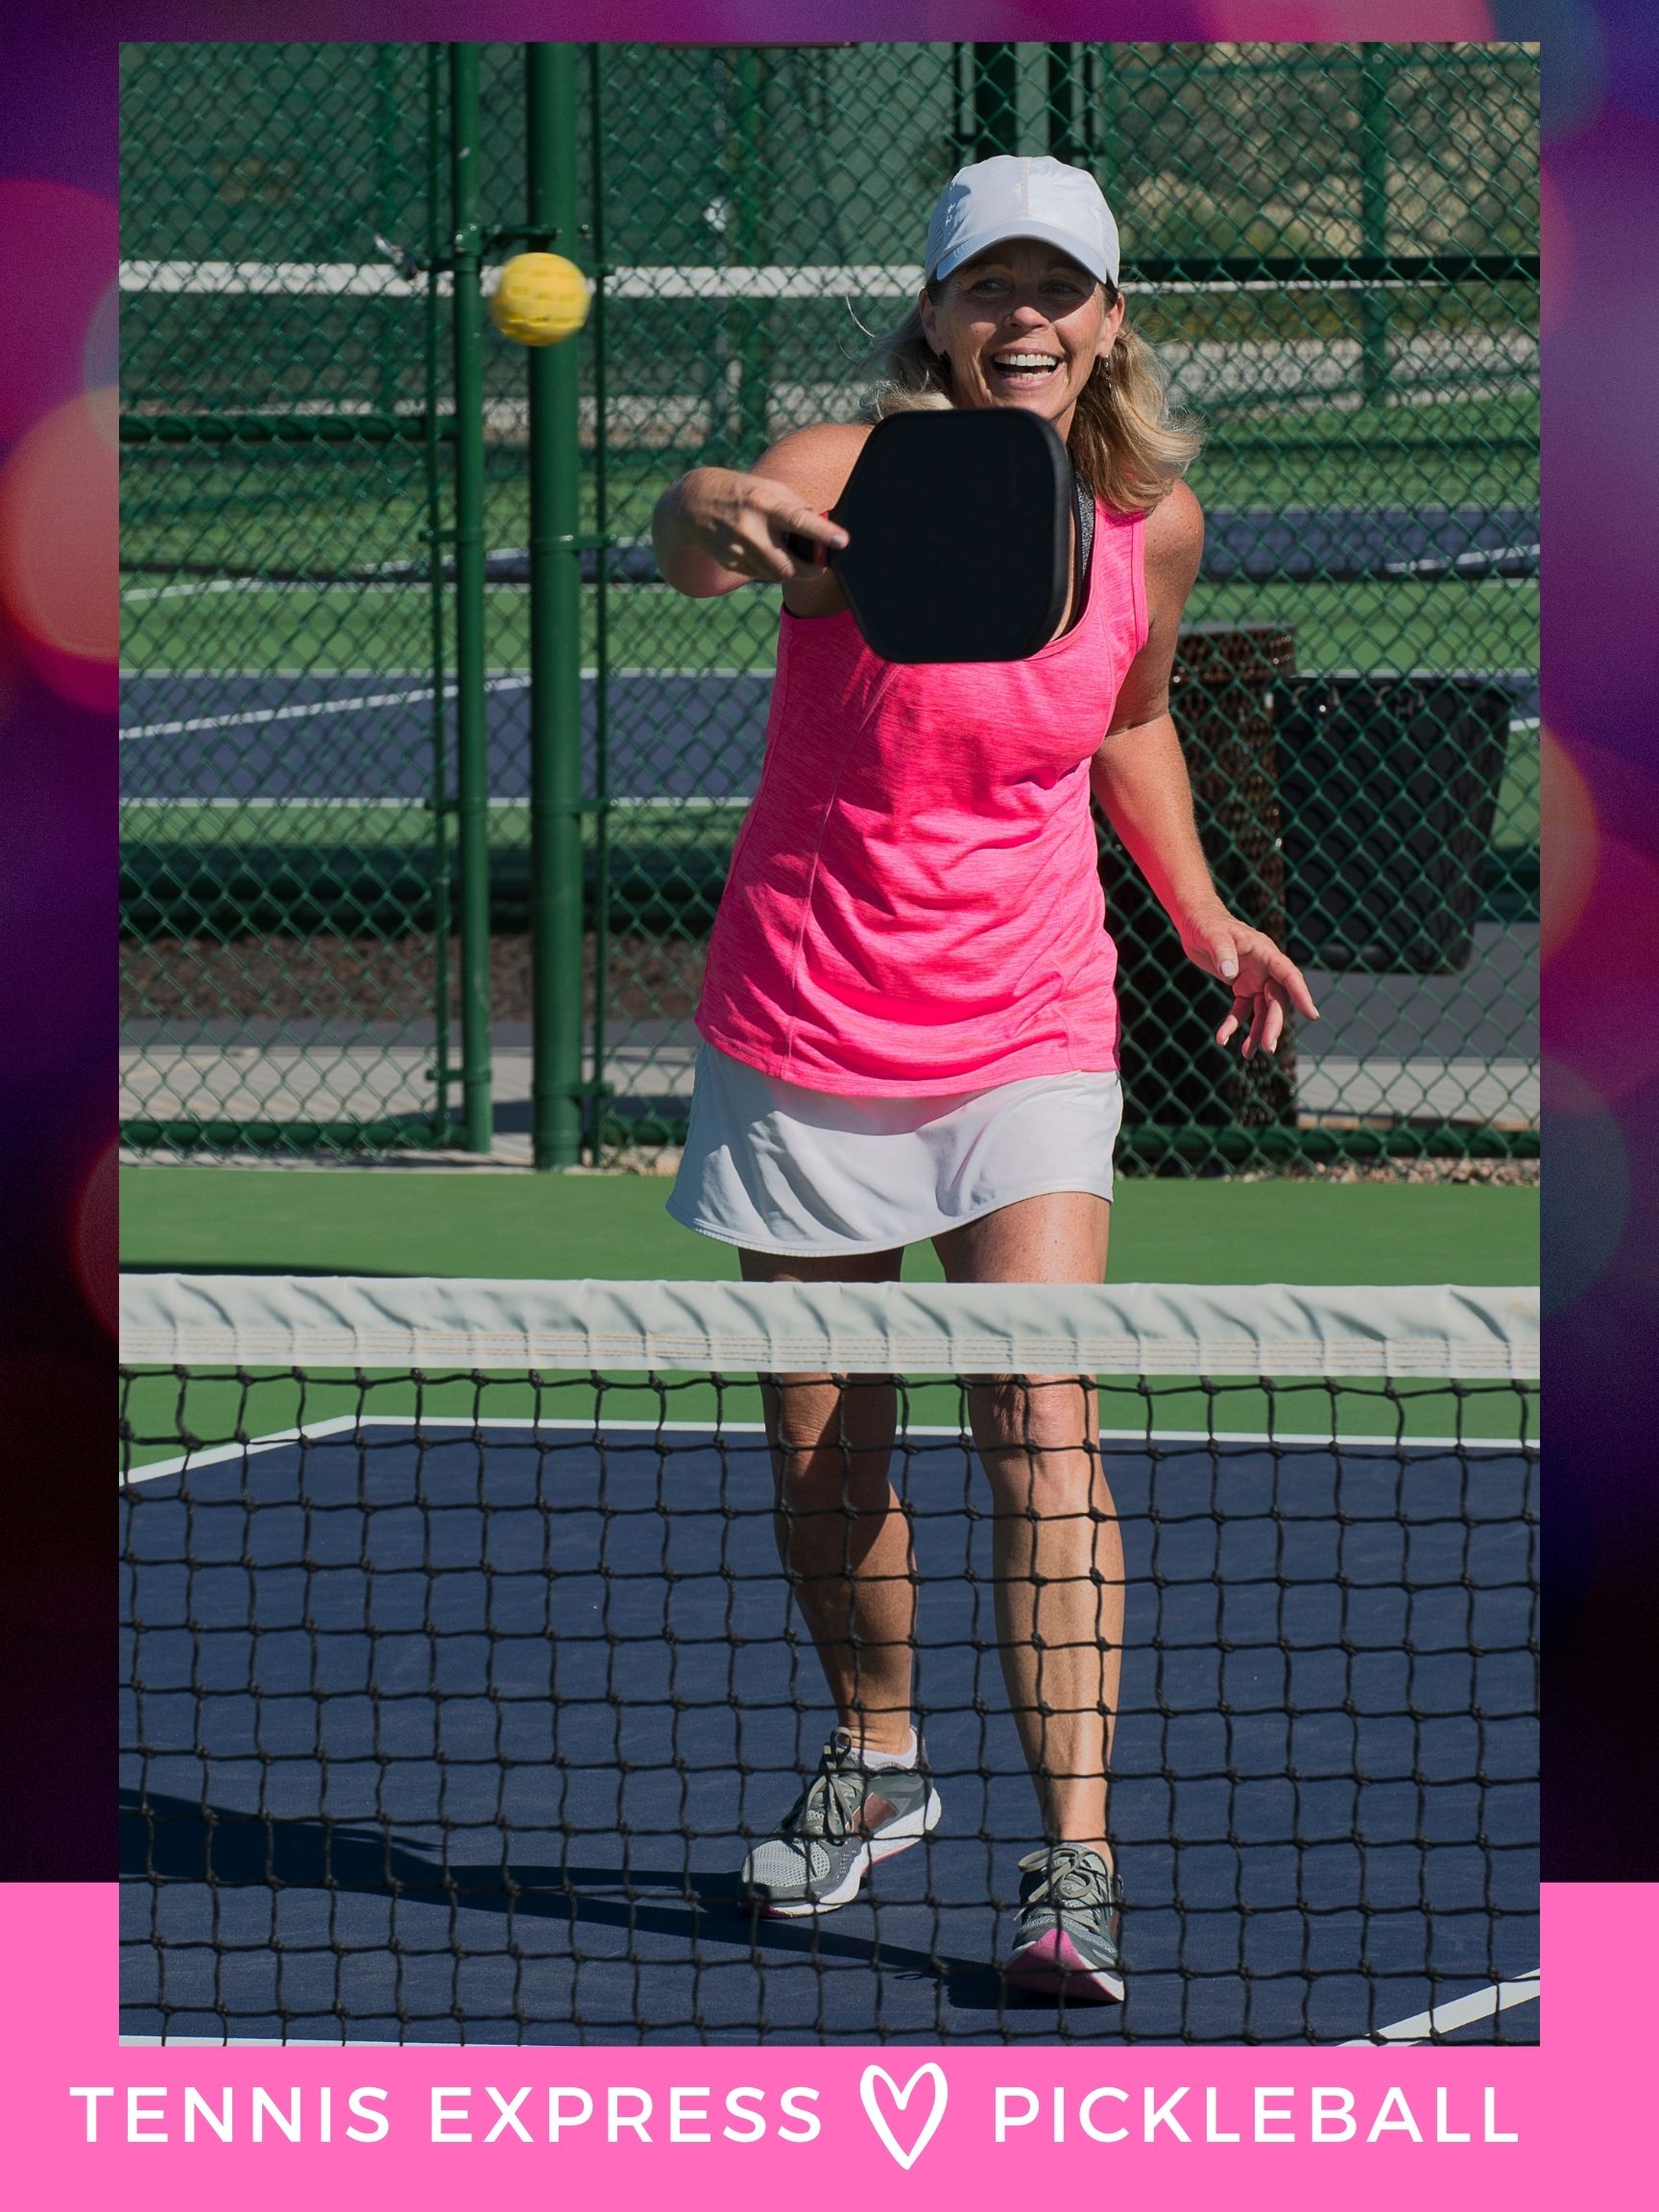 Pretty In Pickleball – Six “Must Haves” to get Your Game On